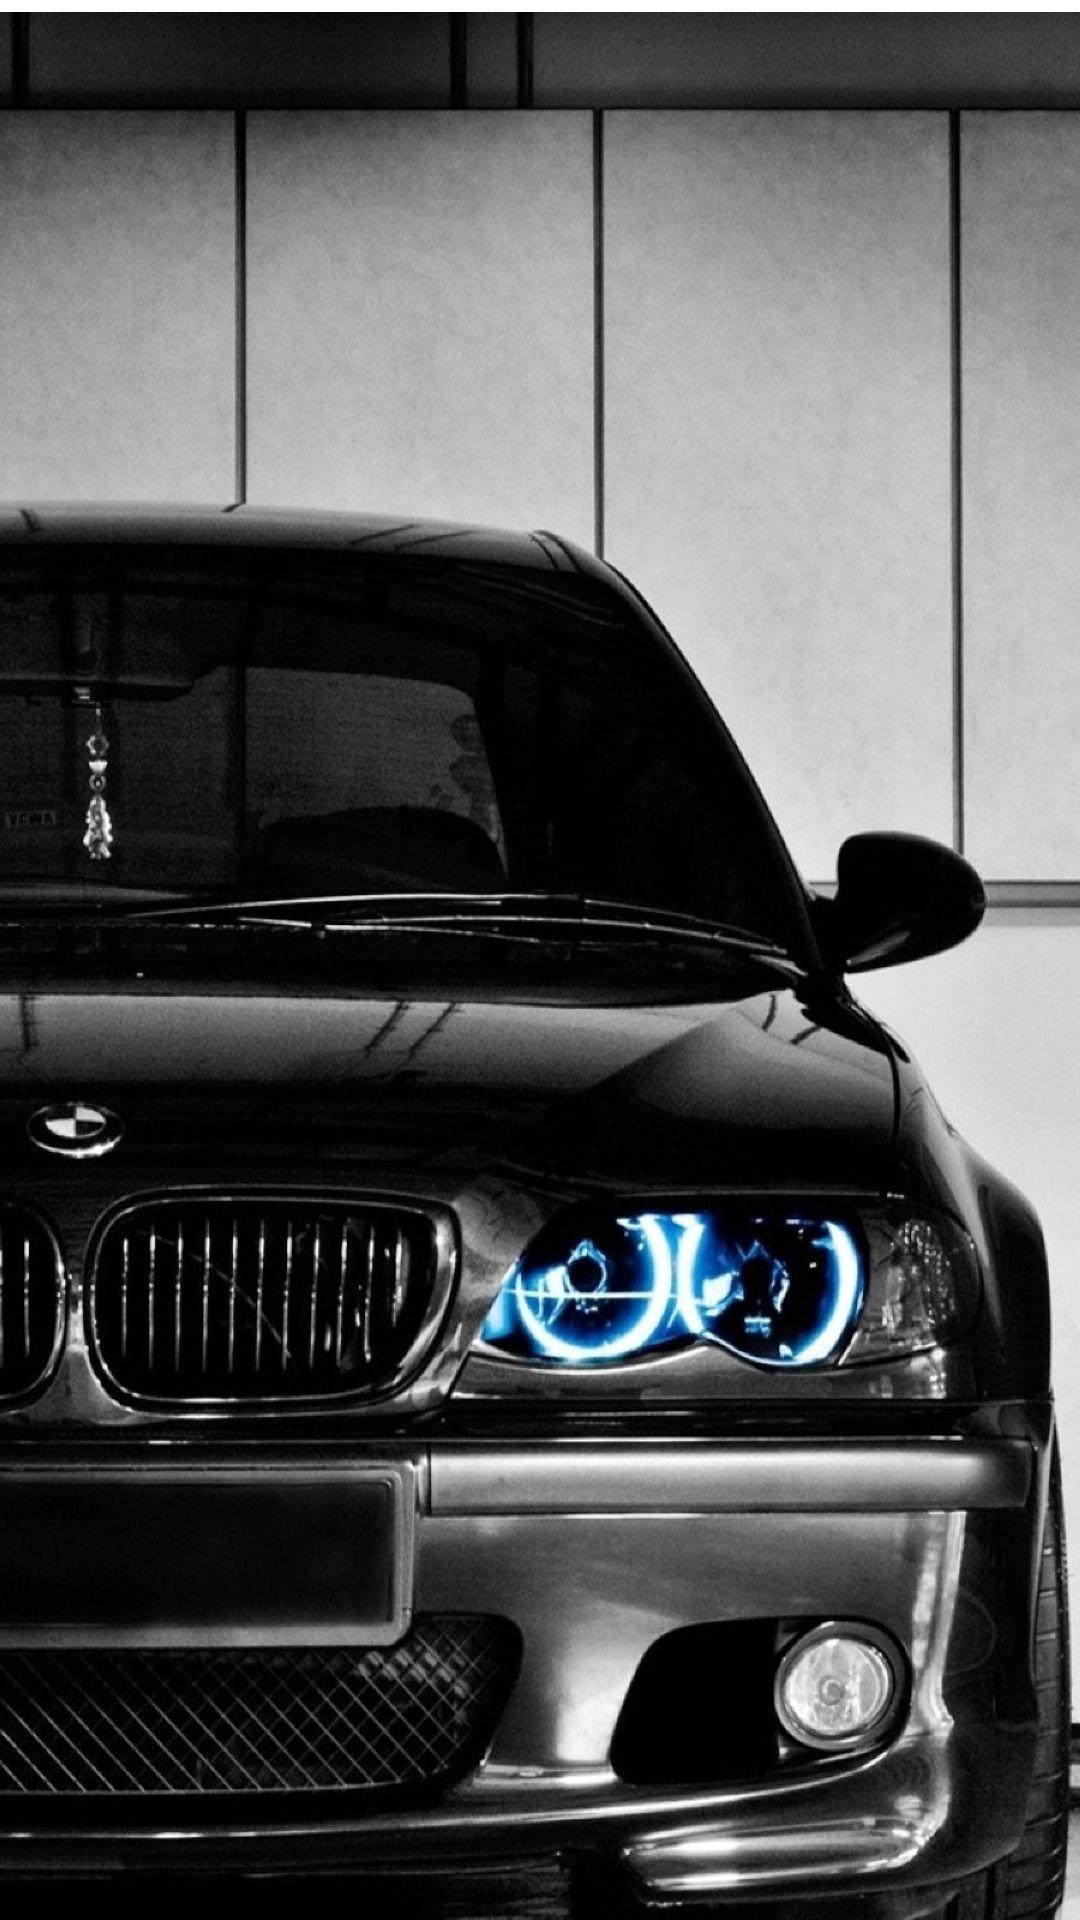 Black BMW Front Blue LED Android Wallpaper free download